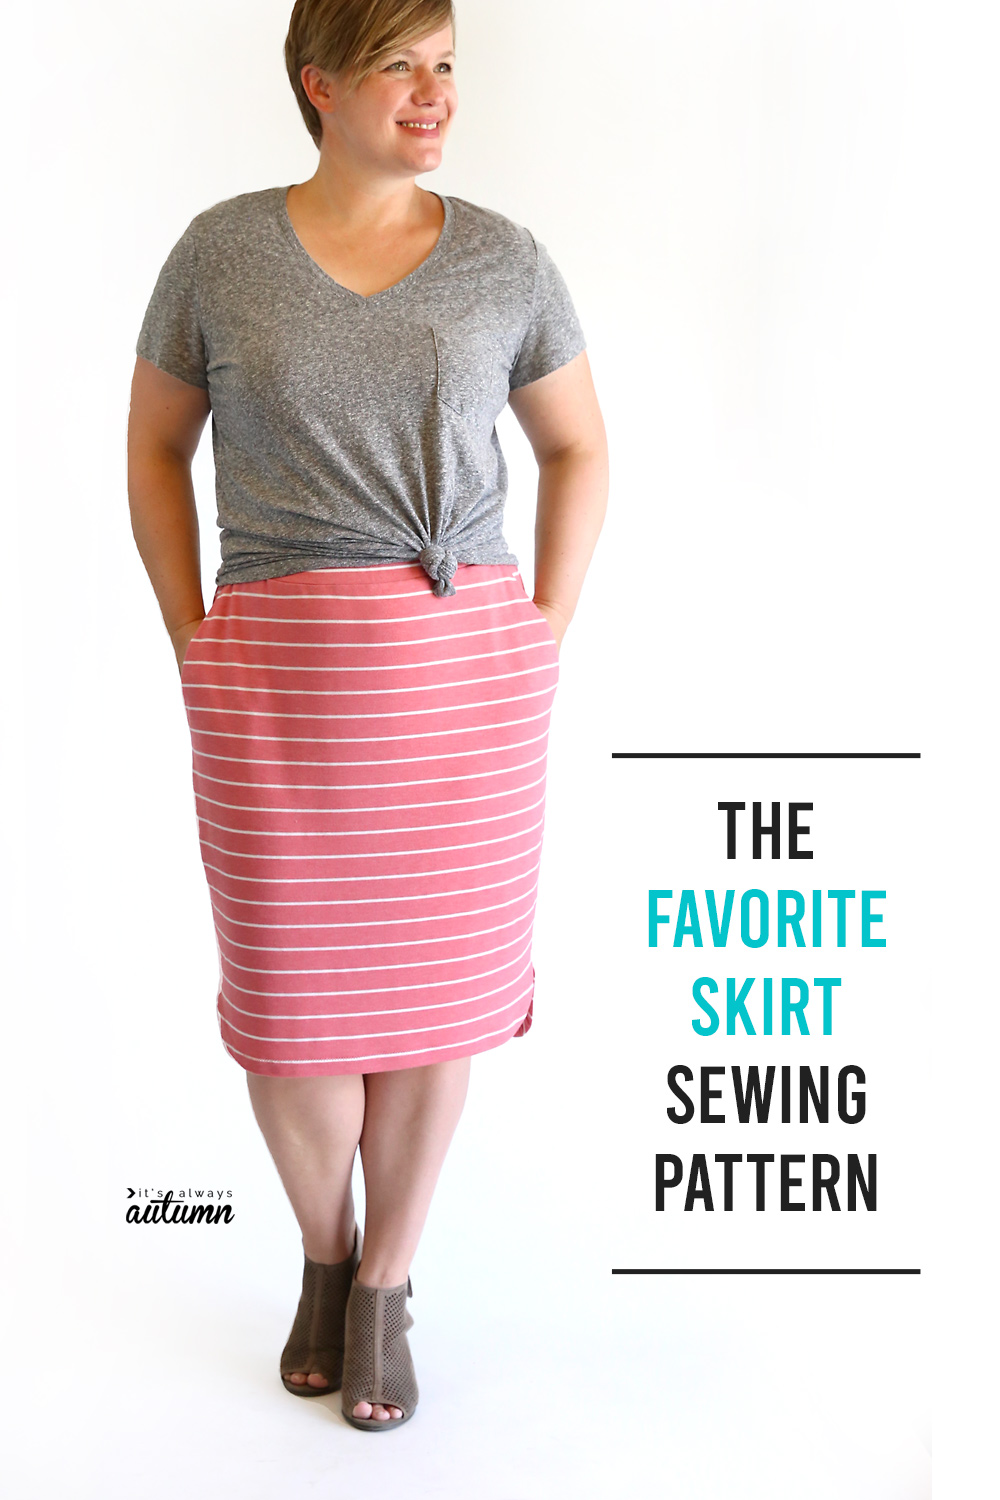 Your new favorite skirt! Click through for the free sewing pattern and tutorial.